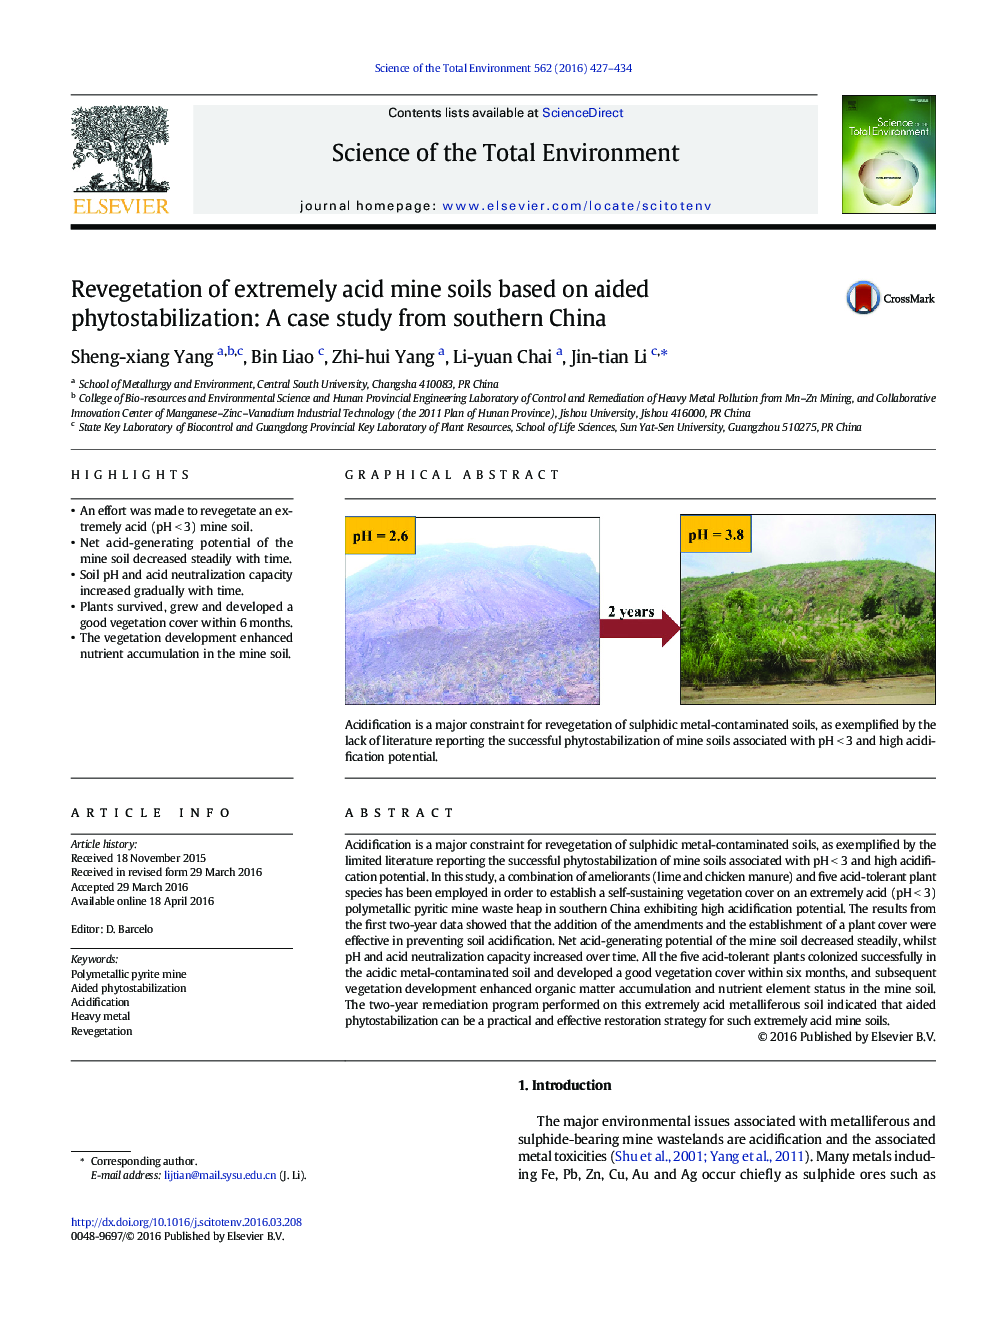 Revegetation of extremely acid mine soils based on aided phytostabilization: A case study from southern China